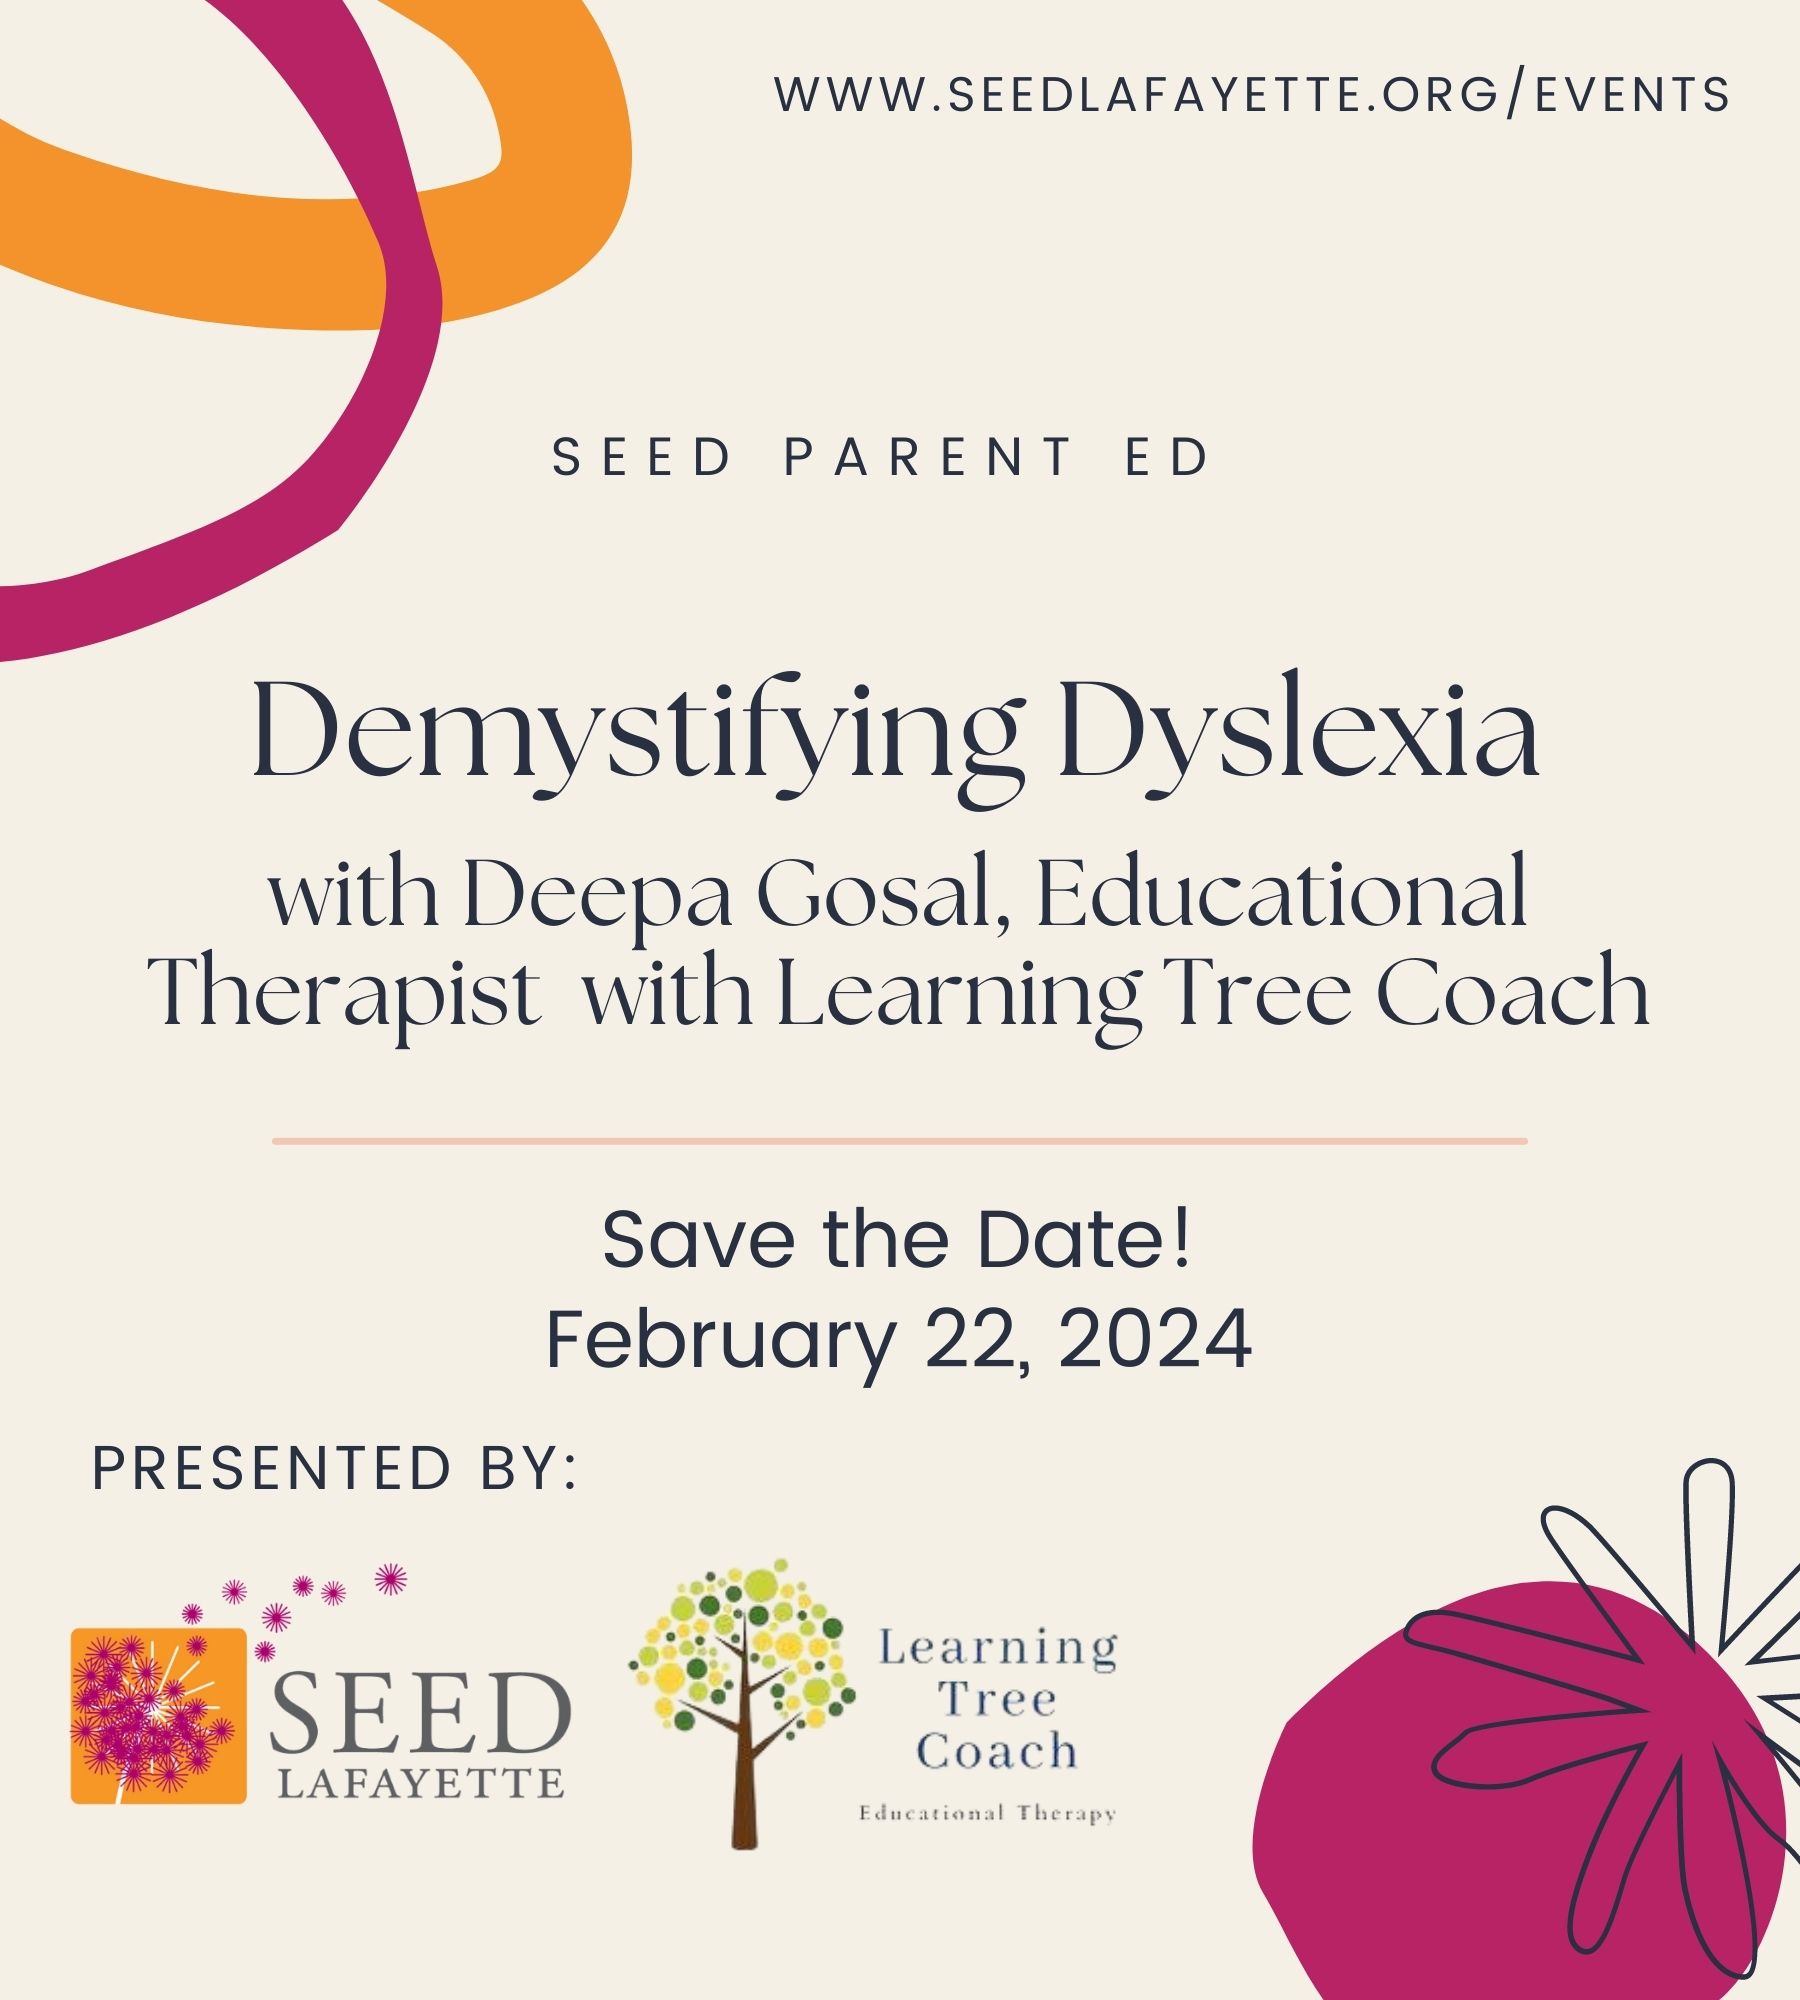 SEED Lafayette Parent Ed, Demystifying Dyslexia with Deepa Gosal, Educational Therapist with Learning Tree Coach. Save the date of February 22, 2023